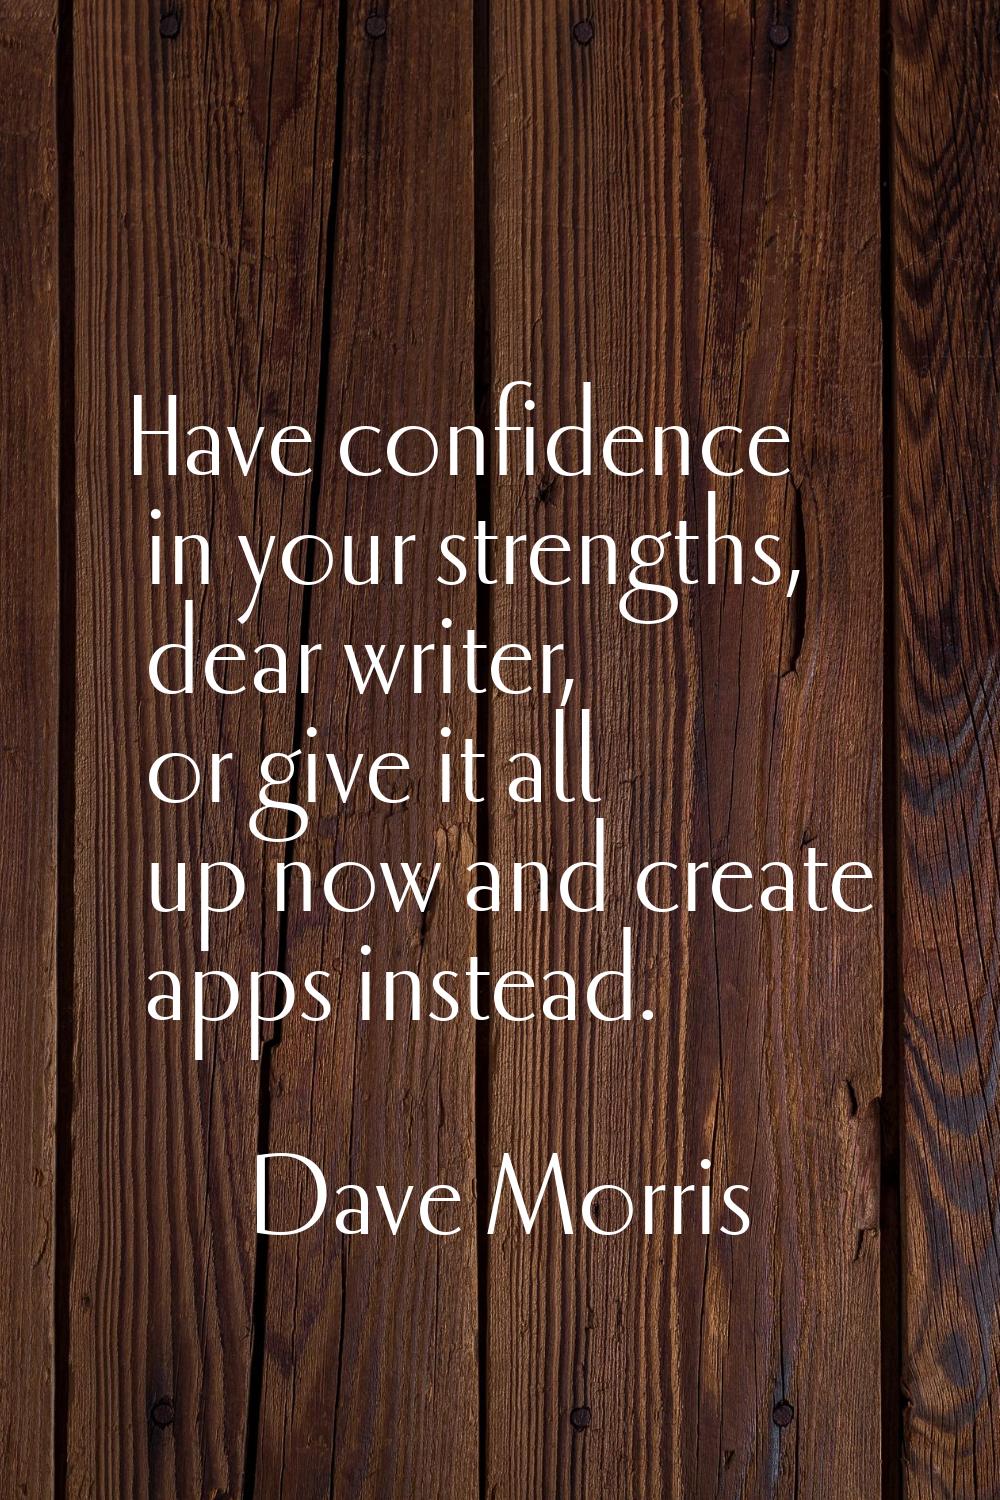 Have confidence in your strengths, dear writer, or give it all up now and create apps instead.